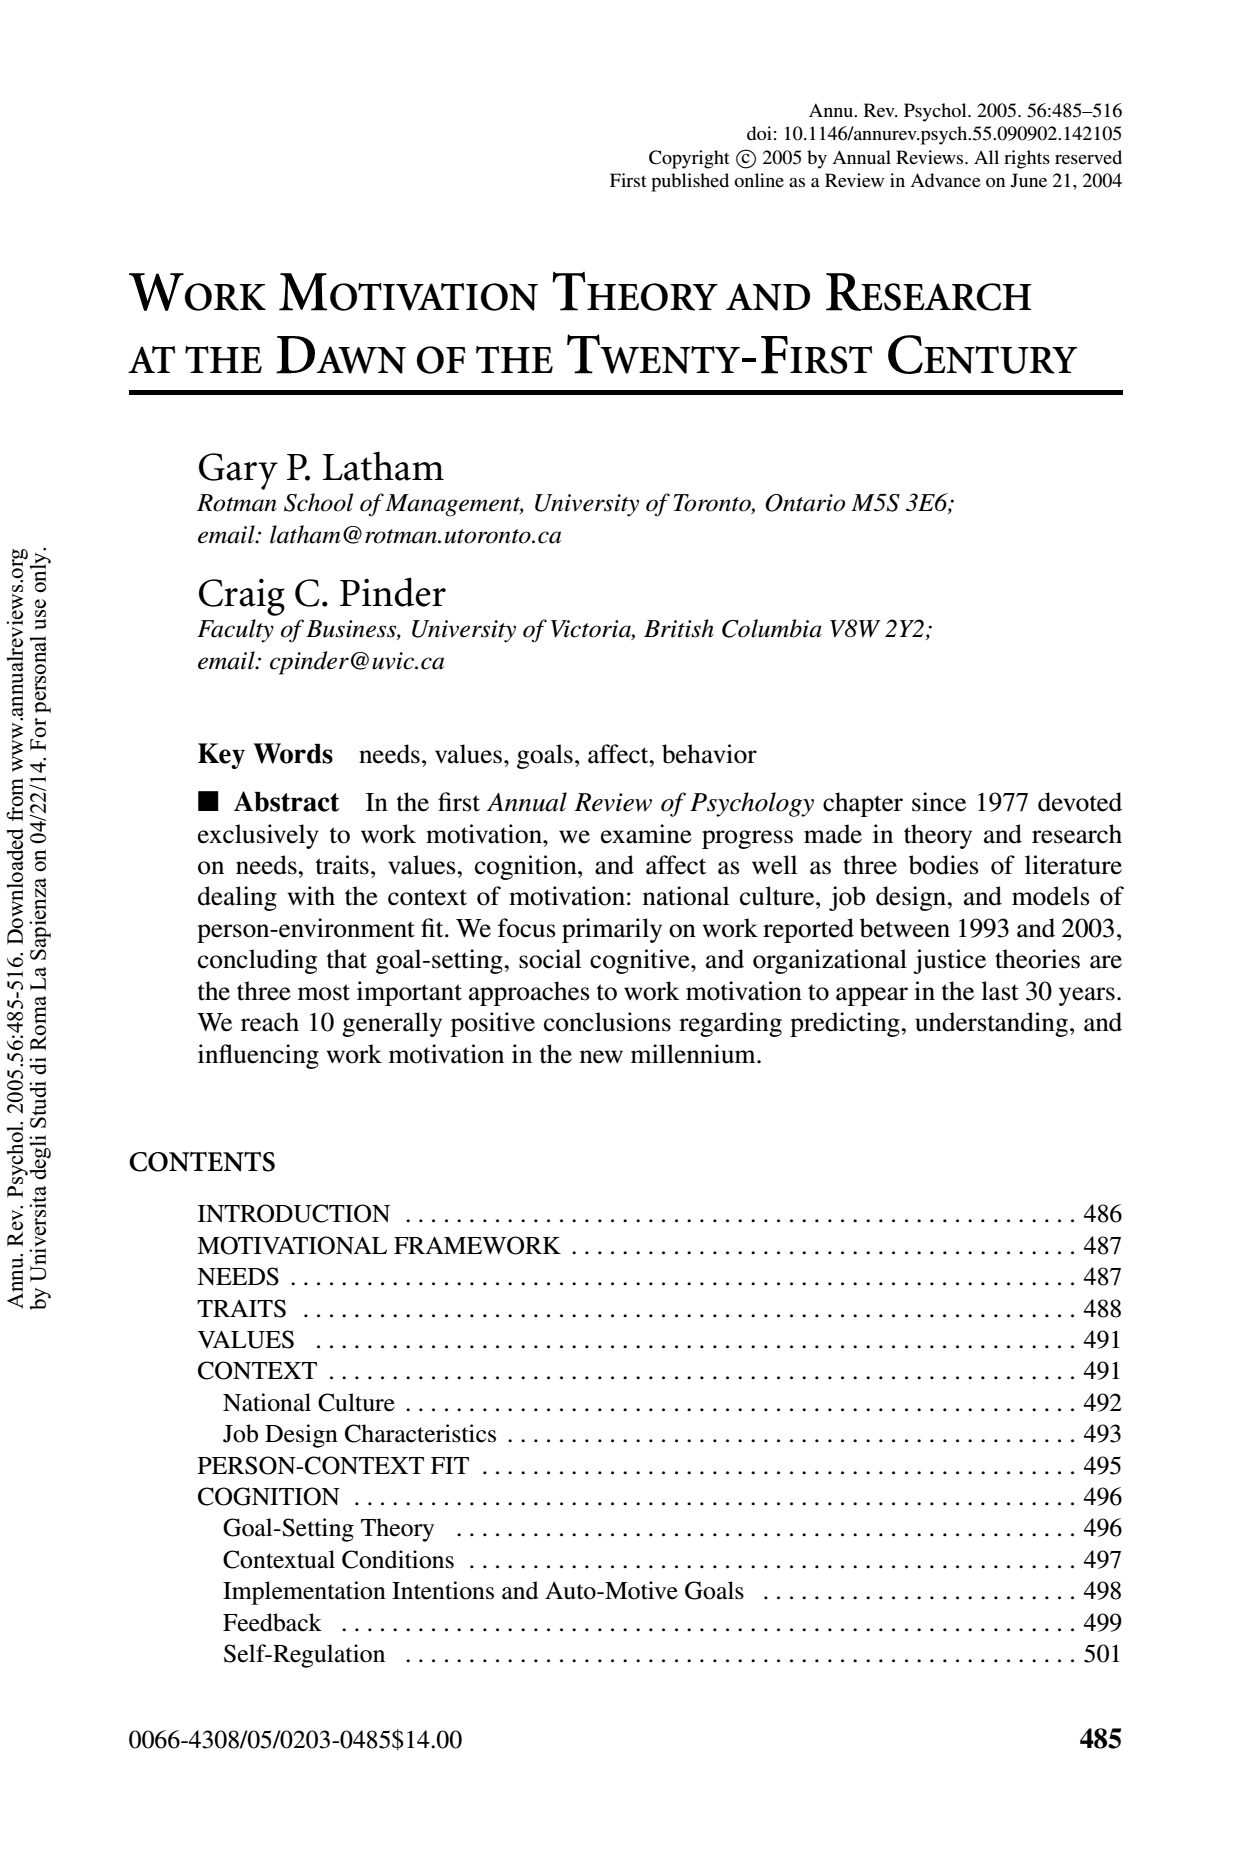 Work motivation theory and research at the dawn of the twenty-first century.